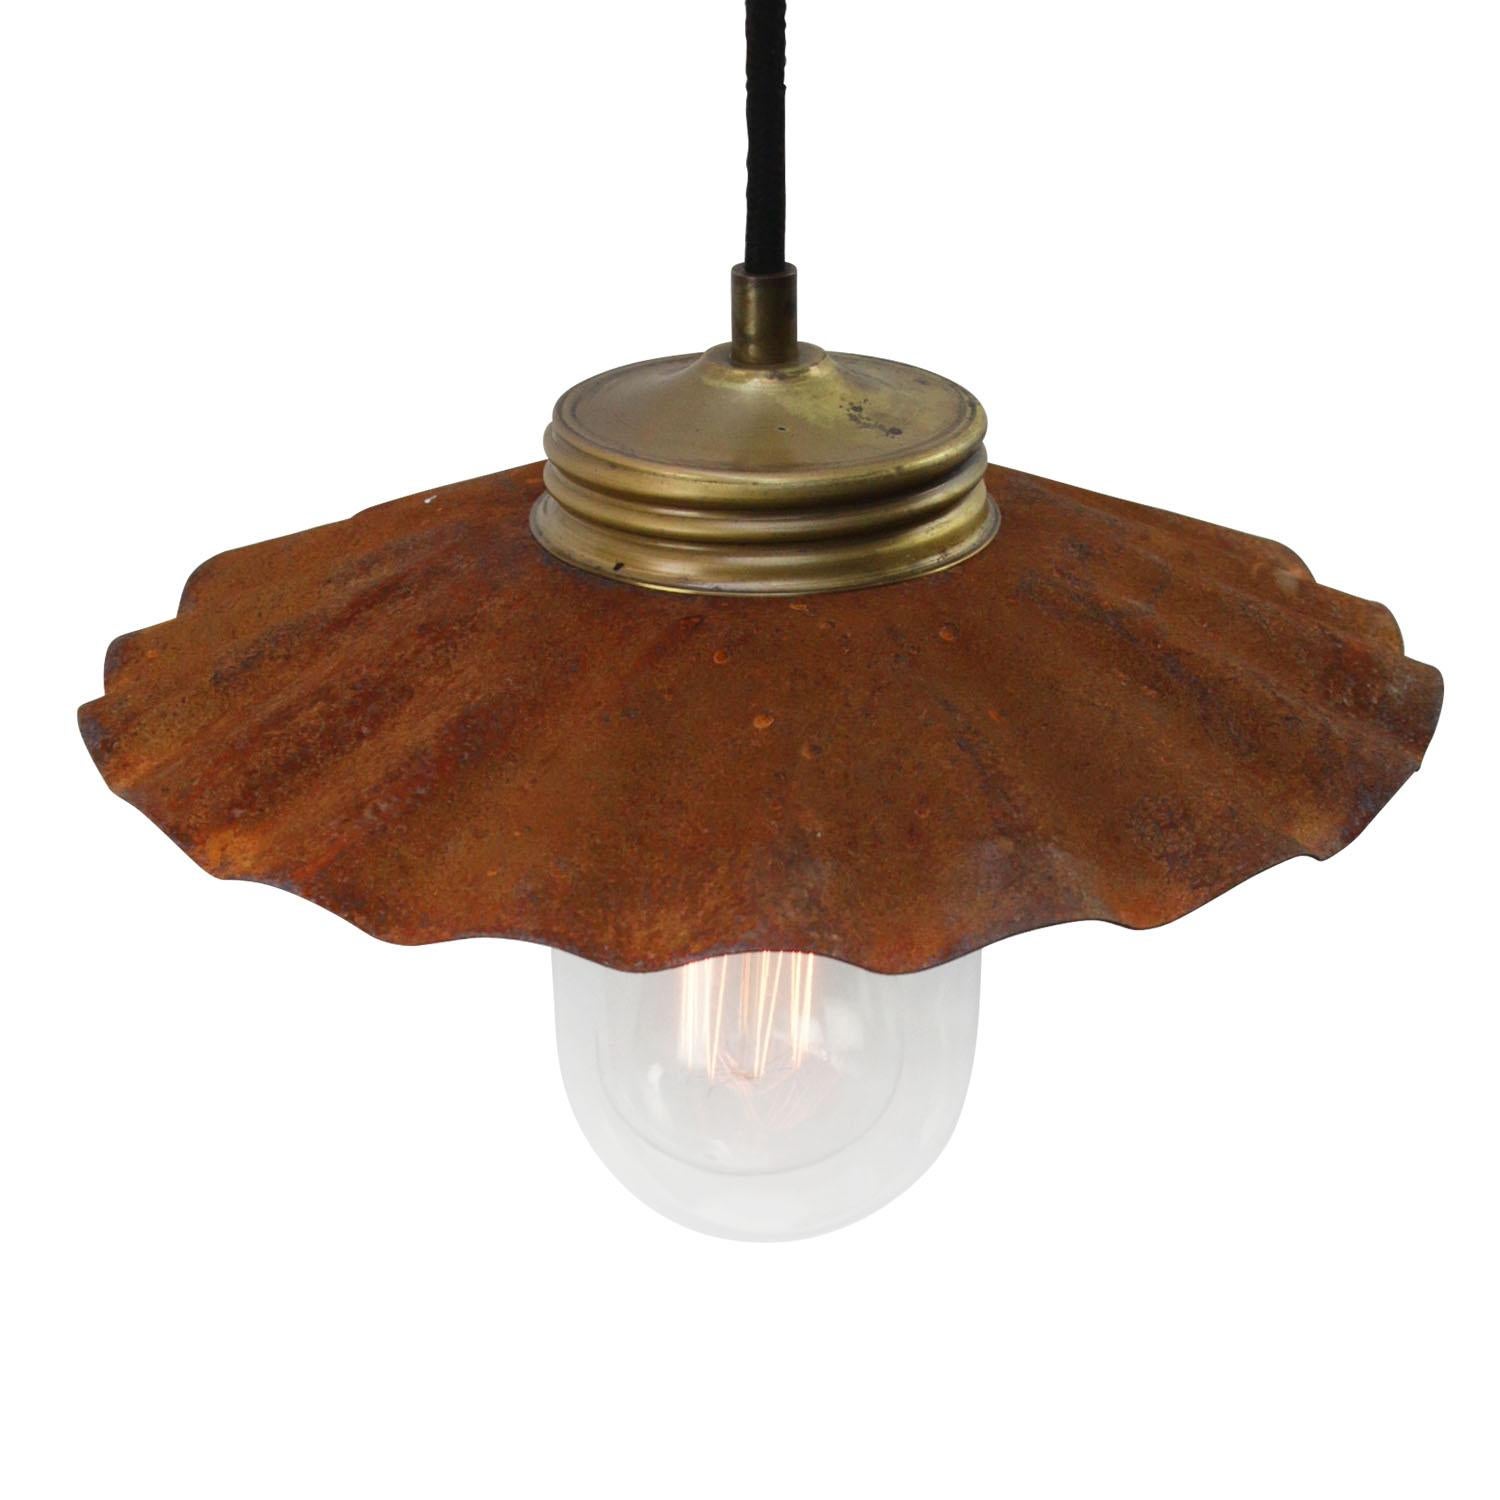 Vintage Industrial metal hanging lamp.
Clear glass with brass top.
Brown rust metal shade

Weight 1.20 kg / 2.6 lb

Priced per individual item. All lamps have been made suitable by international standards for incandescent light bulbs,